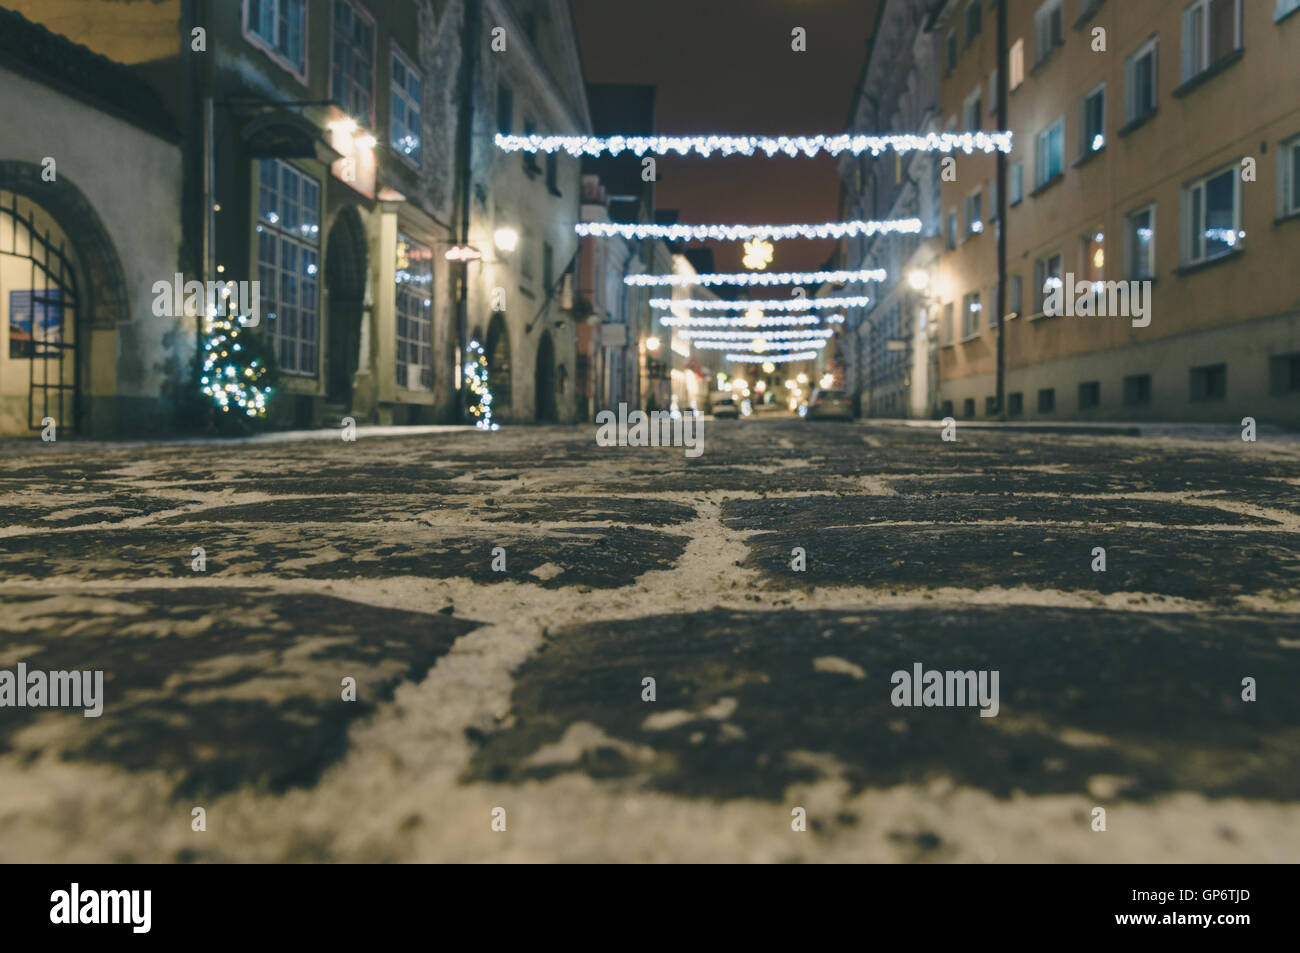 Blurred image of street decorated with Christmas illumination. From ground view Stock Photo